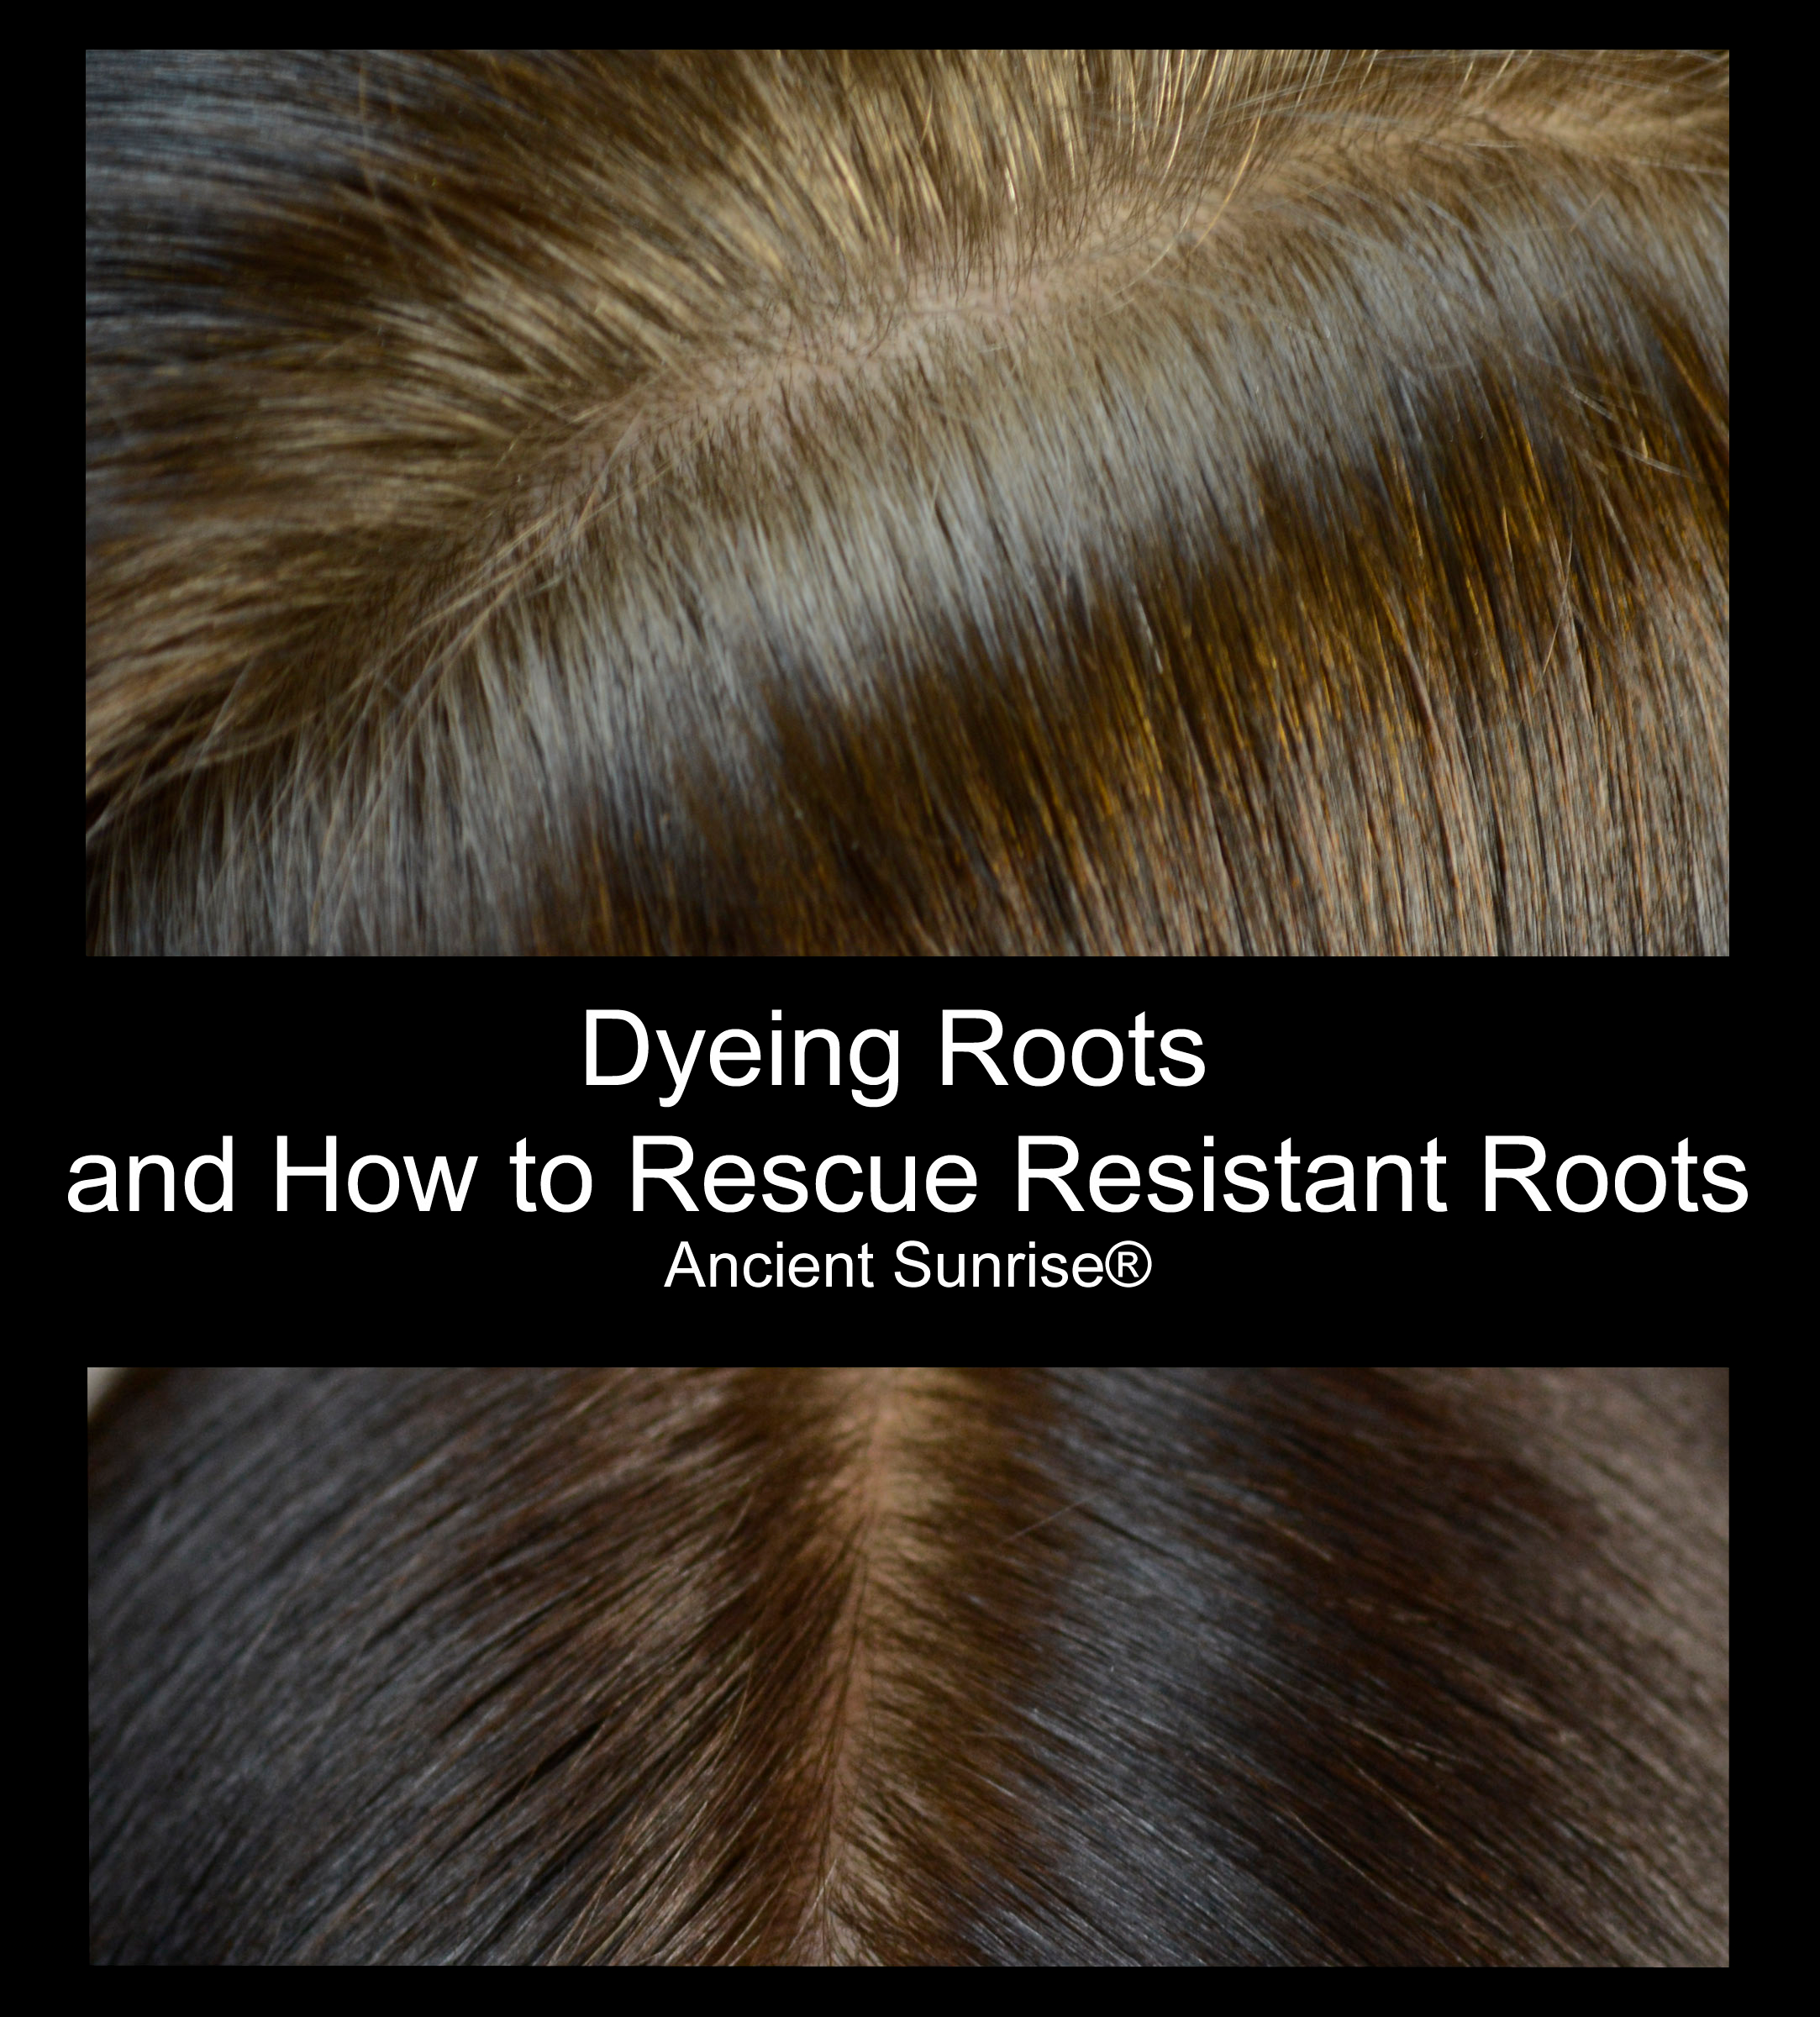 Full Coverage: Dyeing Roots and How to Rescue Resistant Roots